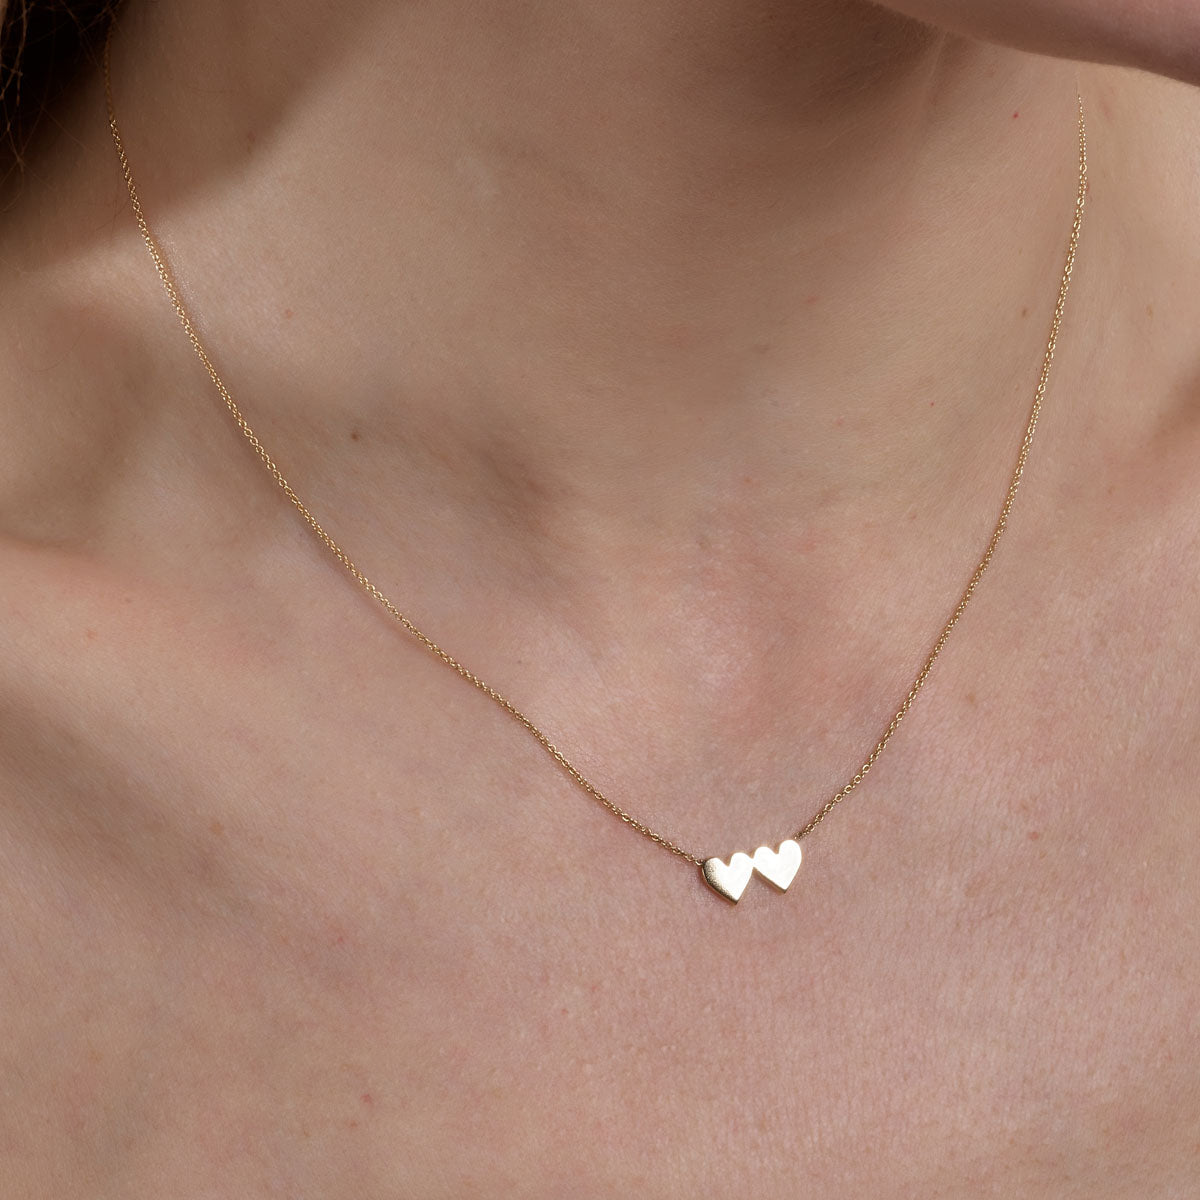 gold double heart necklace on womans neck